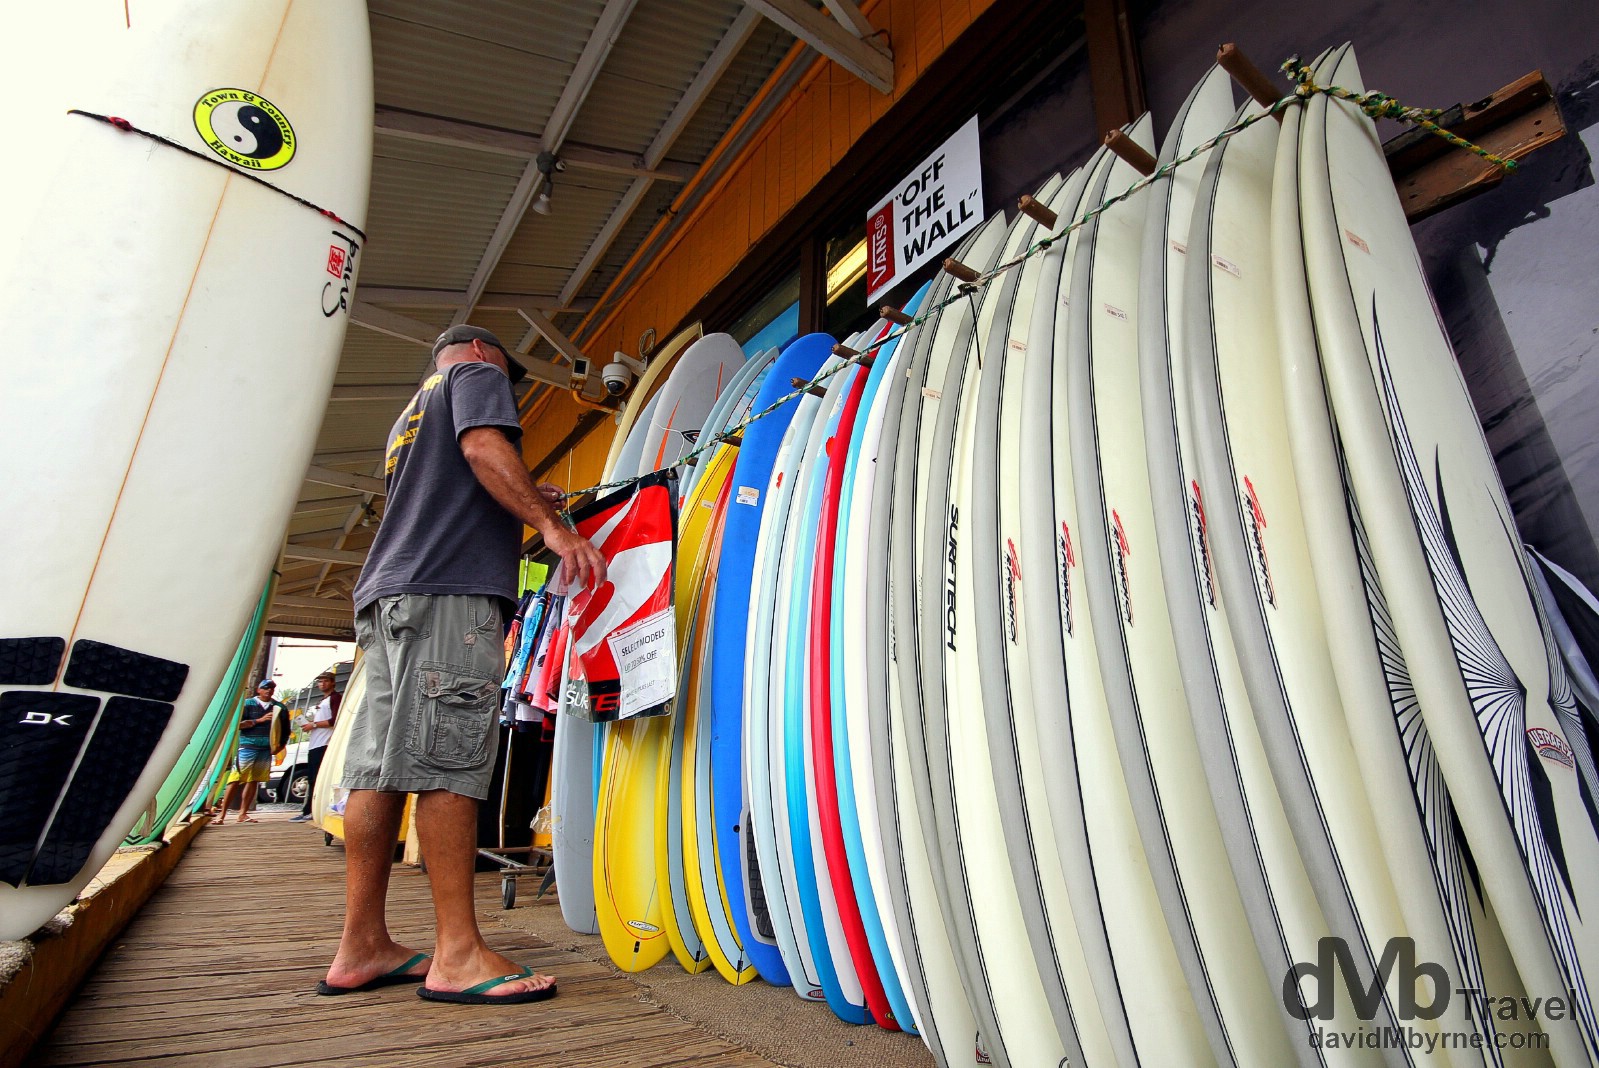 Looking at surf boards outside Surn N Sea, one of the most famous surfing shops in the world. Haleiwa, North Shore, Oahu, Hawaii. March 10th 2013.